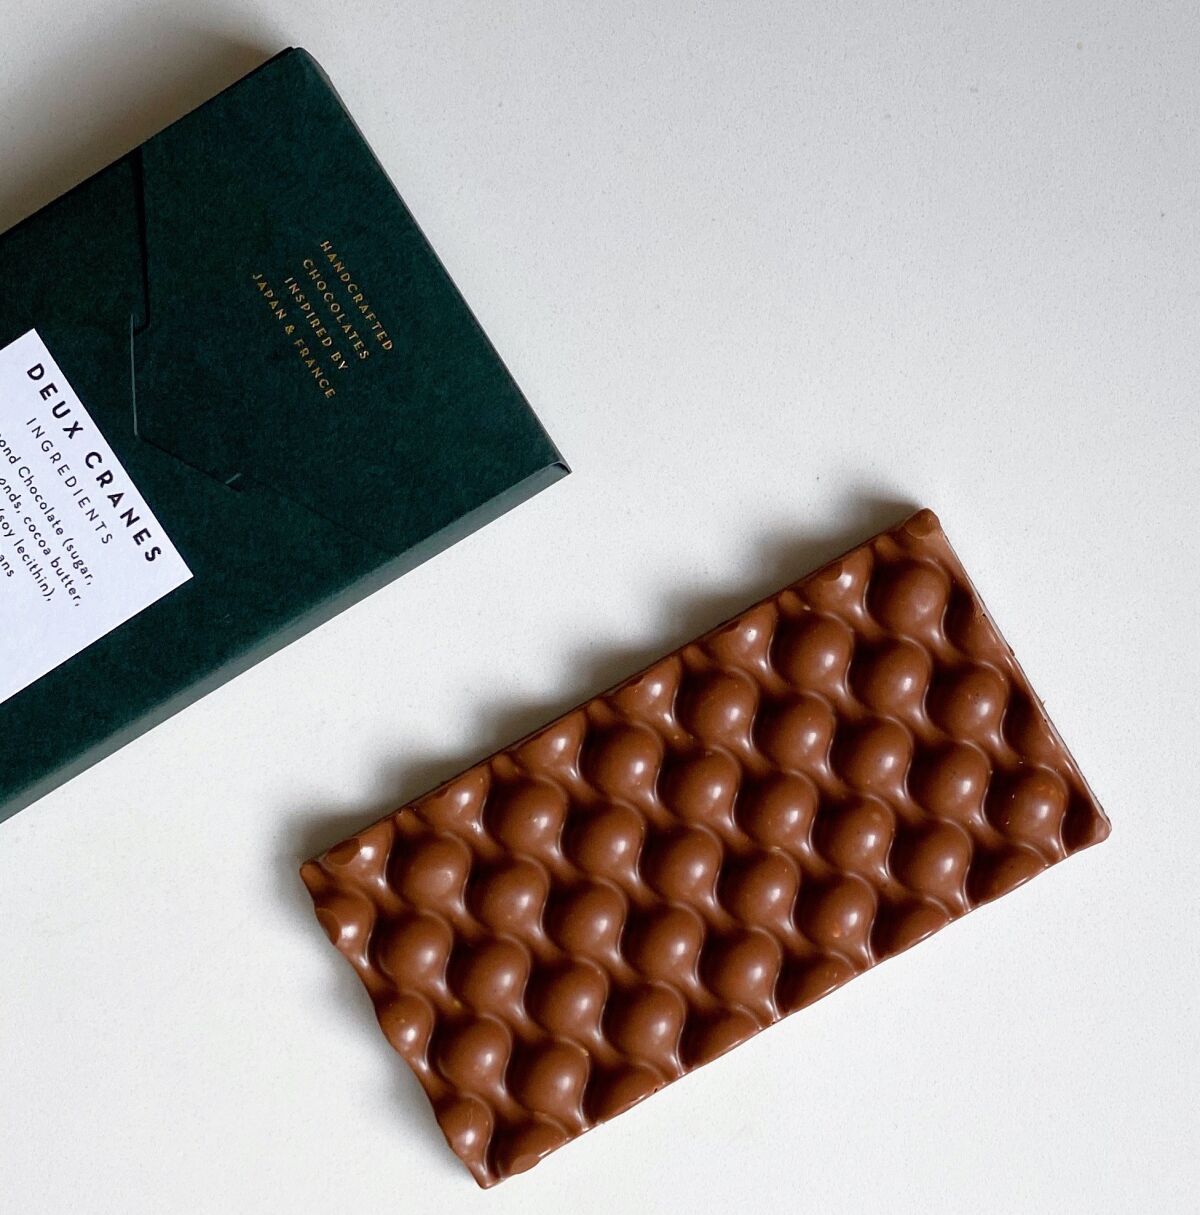 A hand-crafted chocolate bar from Deux Cranes in San Diego